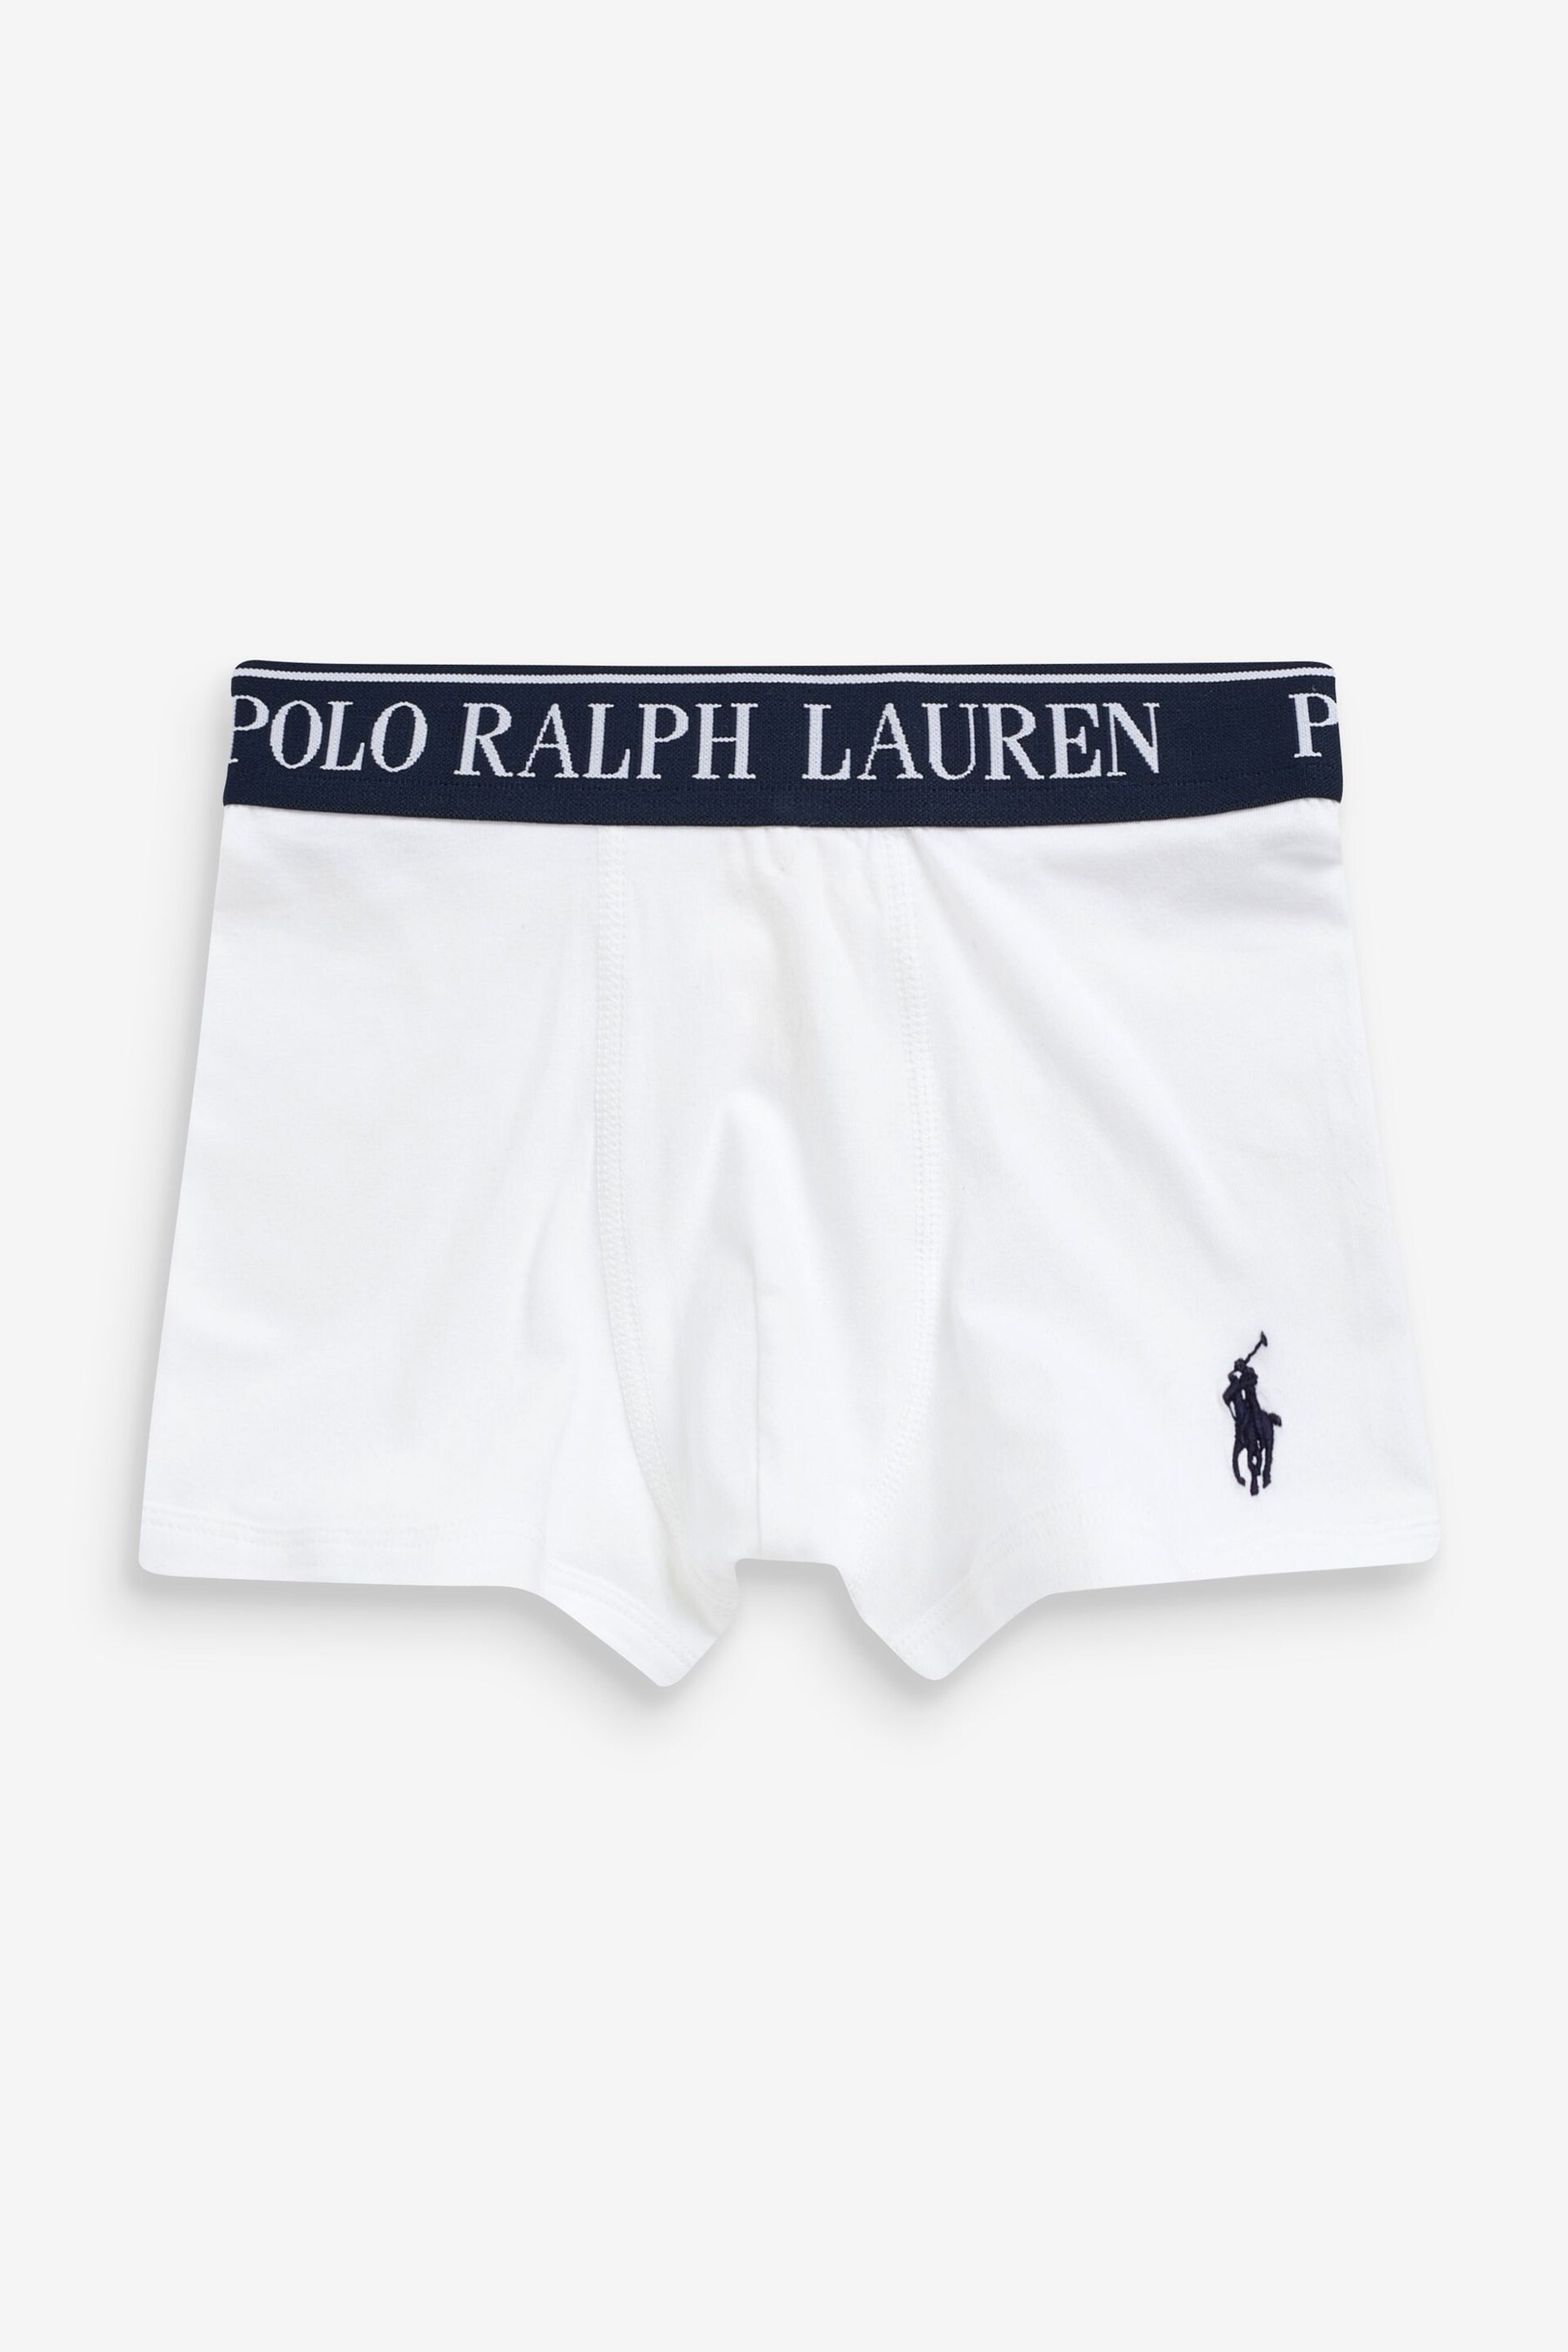 Polo Ralph Lauren Boys White Waistband Boxers 3 Pack - Image 4 of 4